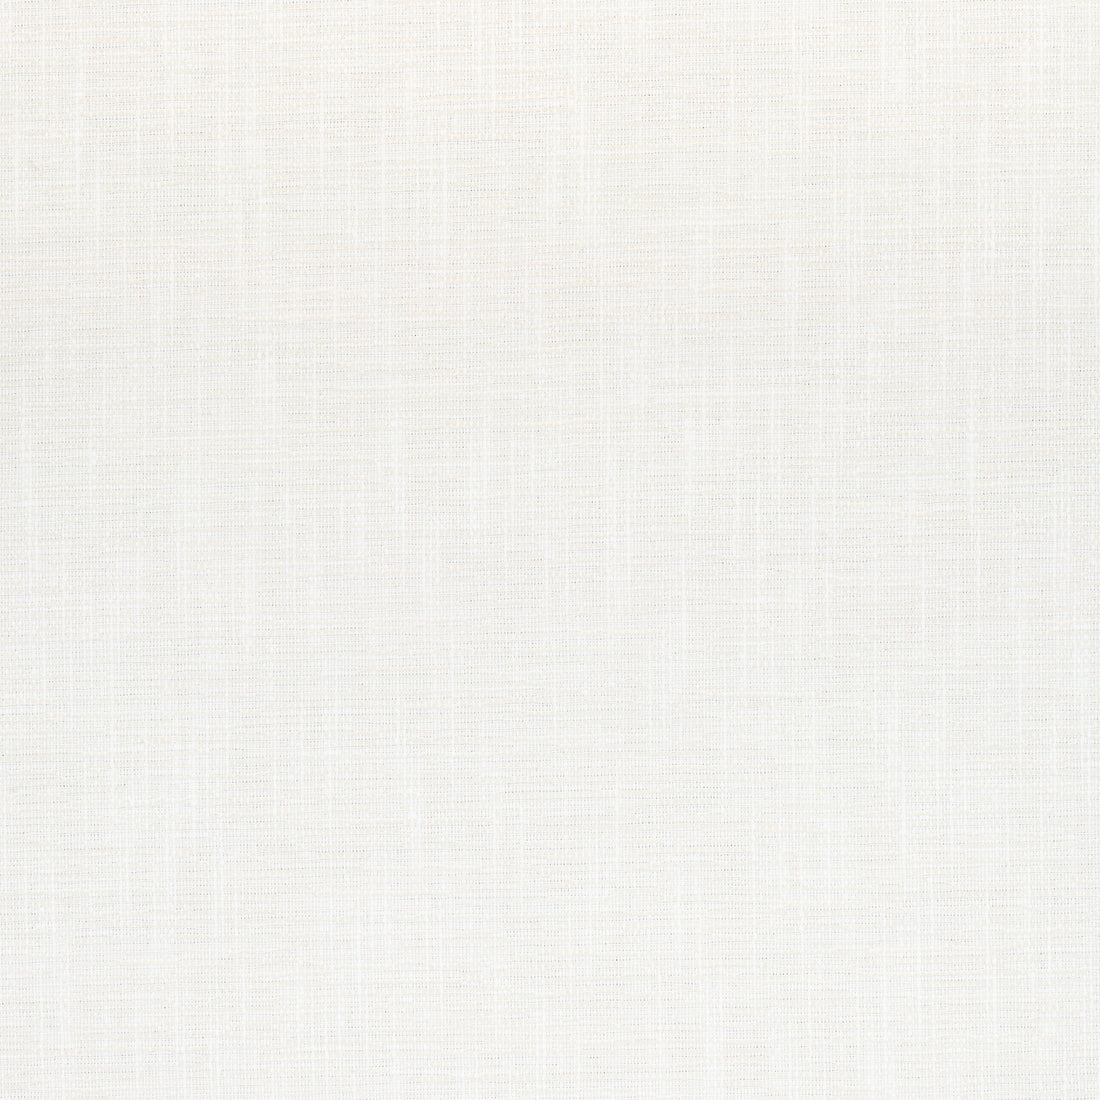 Piper fabric in ivory color - pattern number W73439 - by Thibaut in the Landmark Textures collection